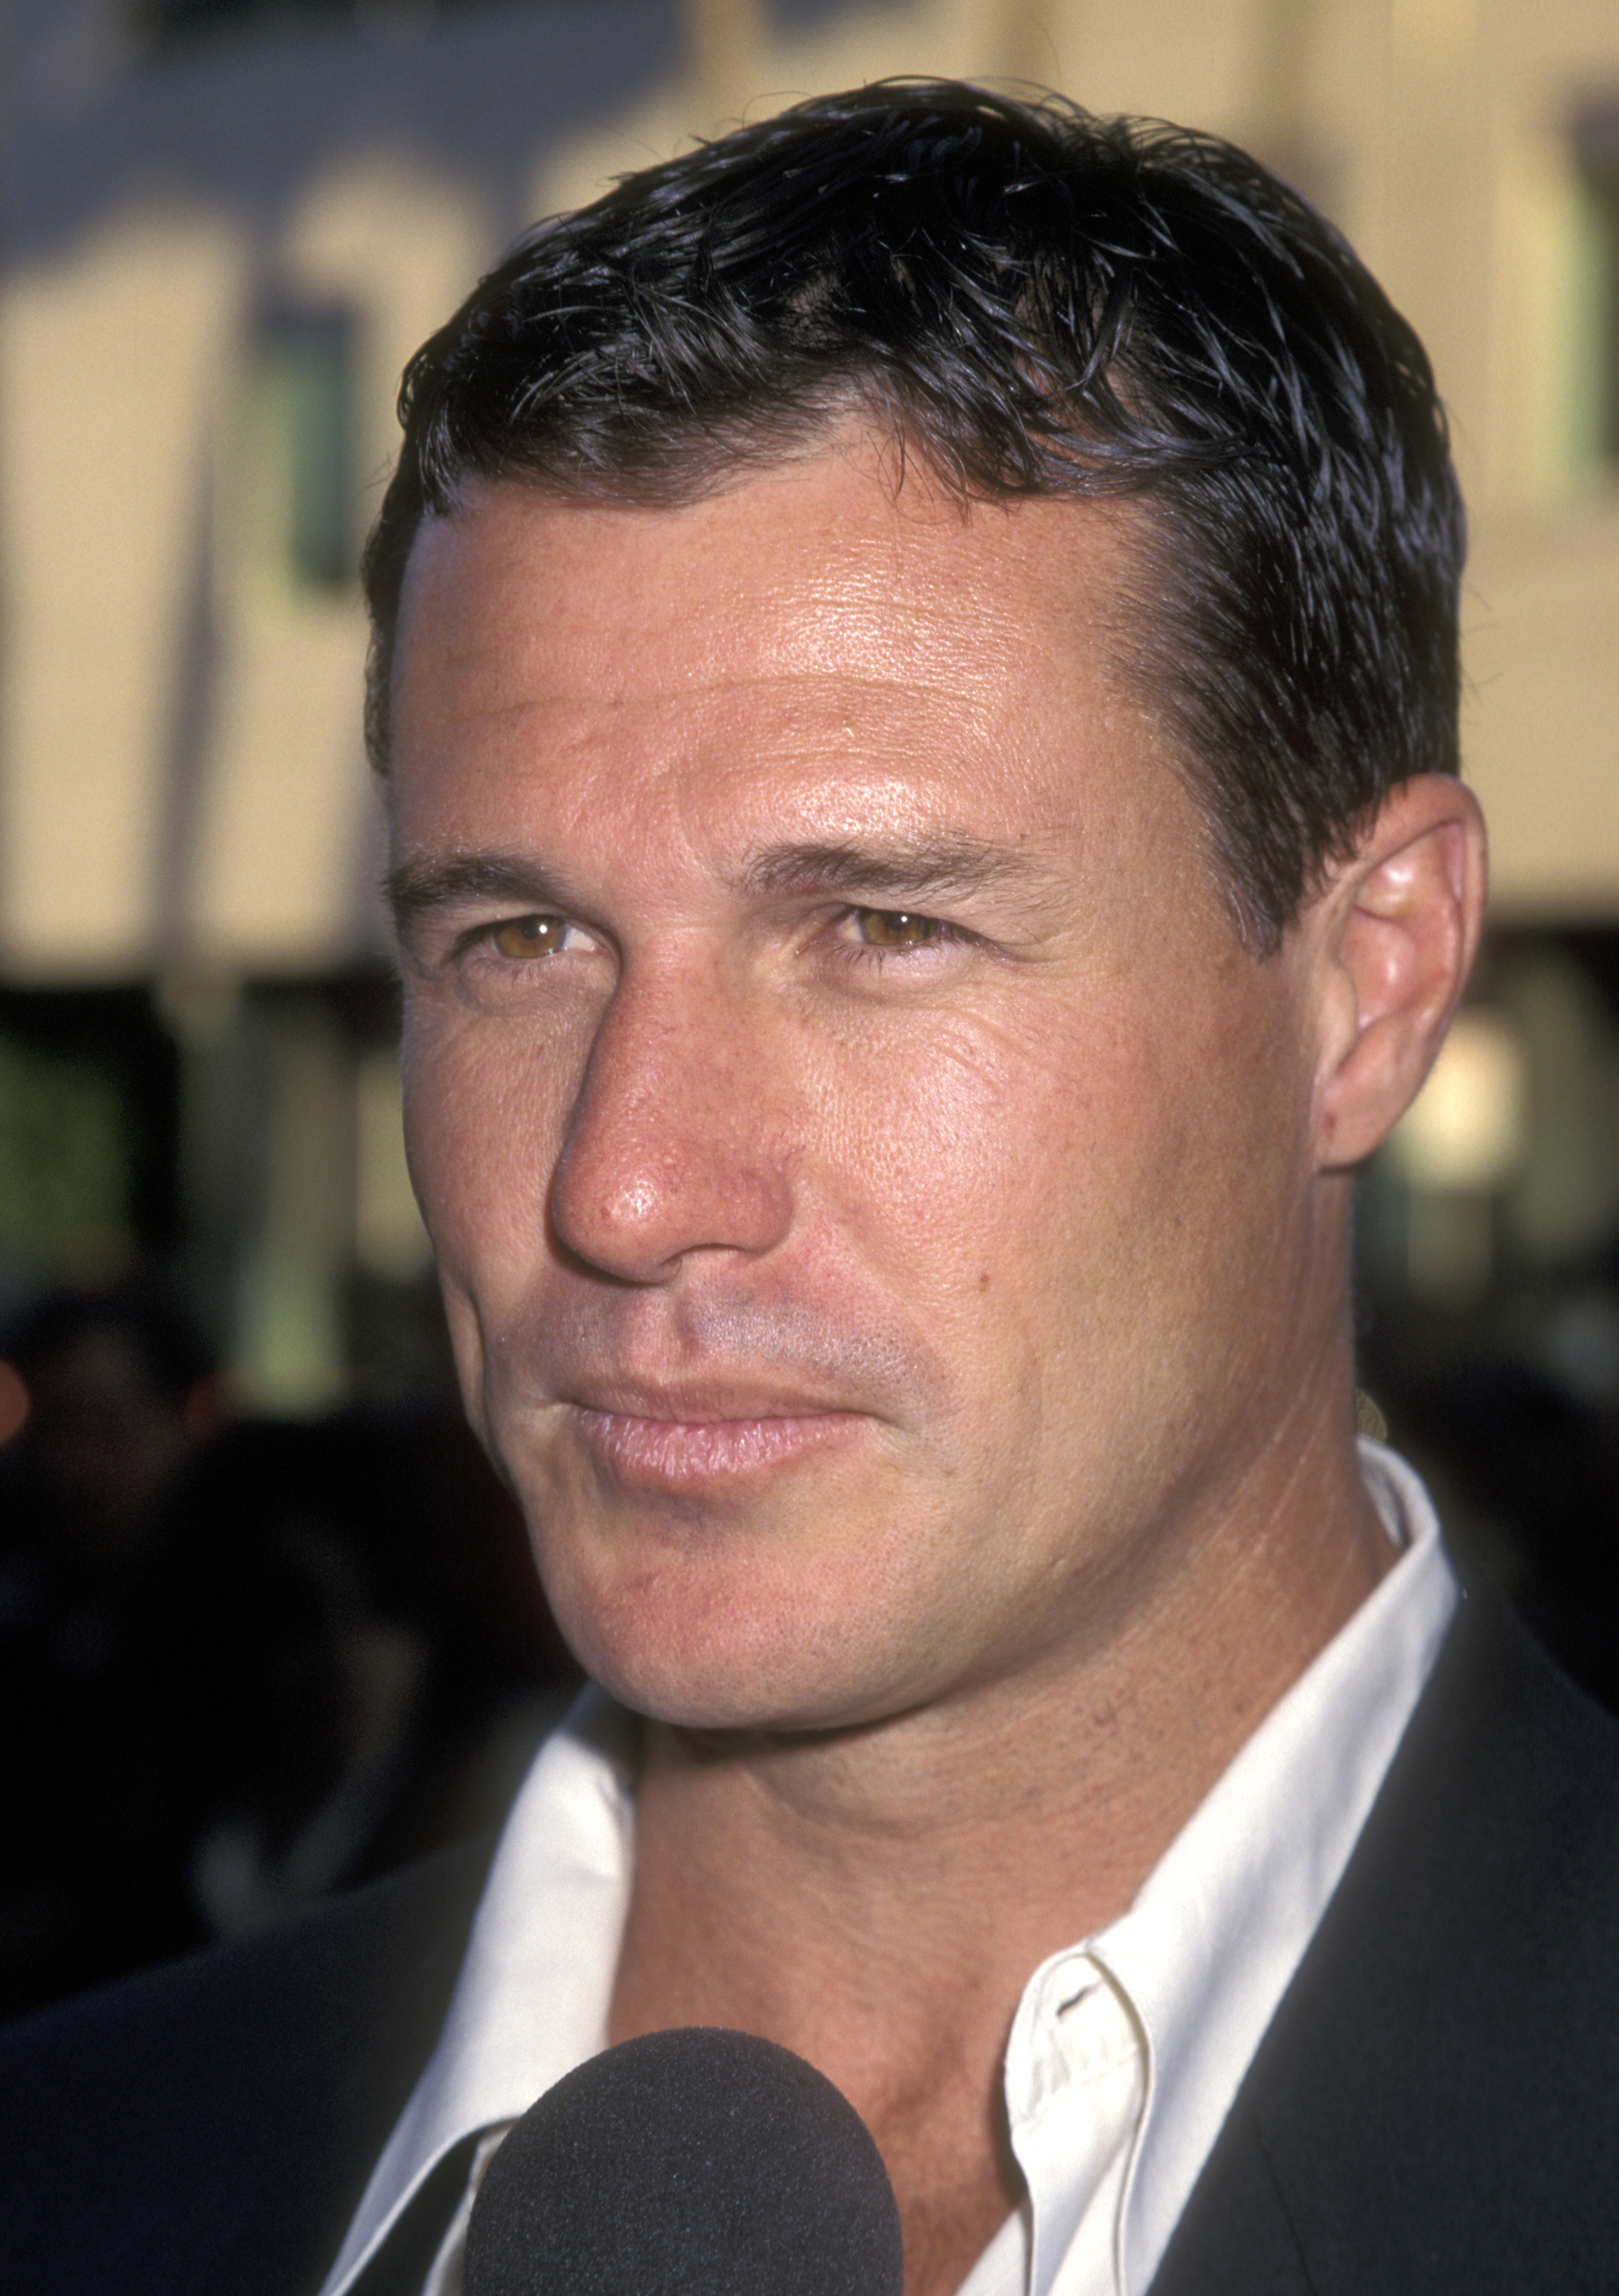 <p>Brad Johnson, a former rodeo cowboy and Marlboro Man and Calvin Klein model who starred in Steven Spielberg's romantic drama "Always" and appeared on "Melrose Place," died from COVID-19 complications on Feb. 18 in Fort Worth, Texas, his rep confirmed to <a href="https://www.hollywoodreporter.com/movies/movie-news/brad-johnson-dead-always-steven-spielberg-1235158300/">The Hollywood Reporter</a> on June 2. Brad -- who also starred in the movie "Flight of the Intruder," the miniseries "Rough Riders" and on TV shows like "Soldier of Fortune, Inc." and "Ned Blessing: The Story of My Life and Times" -- was 62. "Although he was taken too early, he lived life to the fullest and taught his children to do the same," his family told THR in a statement. "Brad greatly enjoyed improving and enhancing land, in a way that maintained and respected its natural beauty. He always felt most at home outdoors, and his passion for the land made that evident. As much as he loved cowboying, hunting and land, Brad loved nothing more than his family."</p><p>MORE: <a href="https://www.wonderwall.com/celebrity/stars-who-had-covid-in-2022-coronavirus-tested-positive-588120.gallery">Stars who've tested positive for COVID in 2022</a></p>